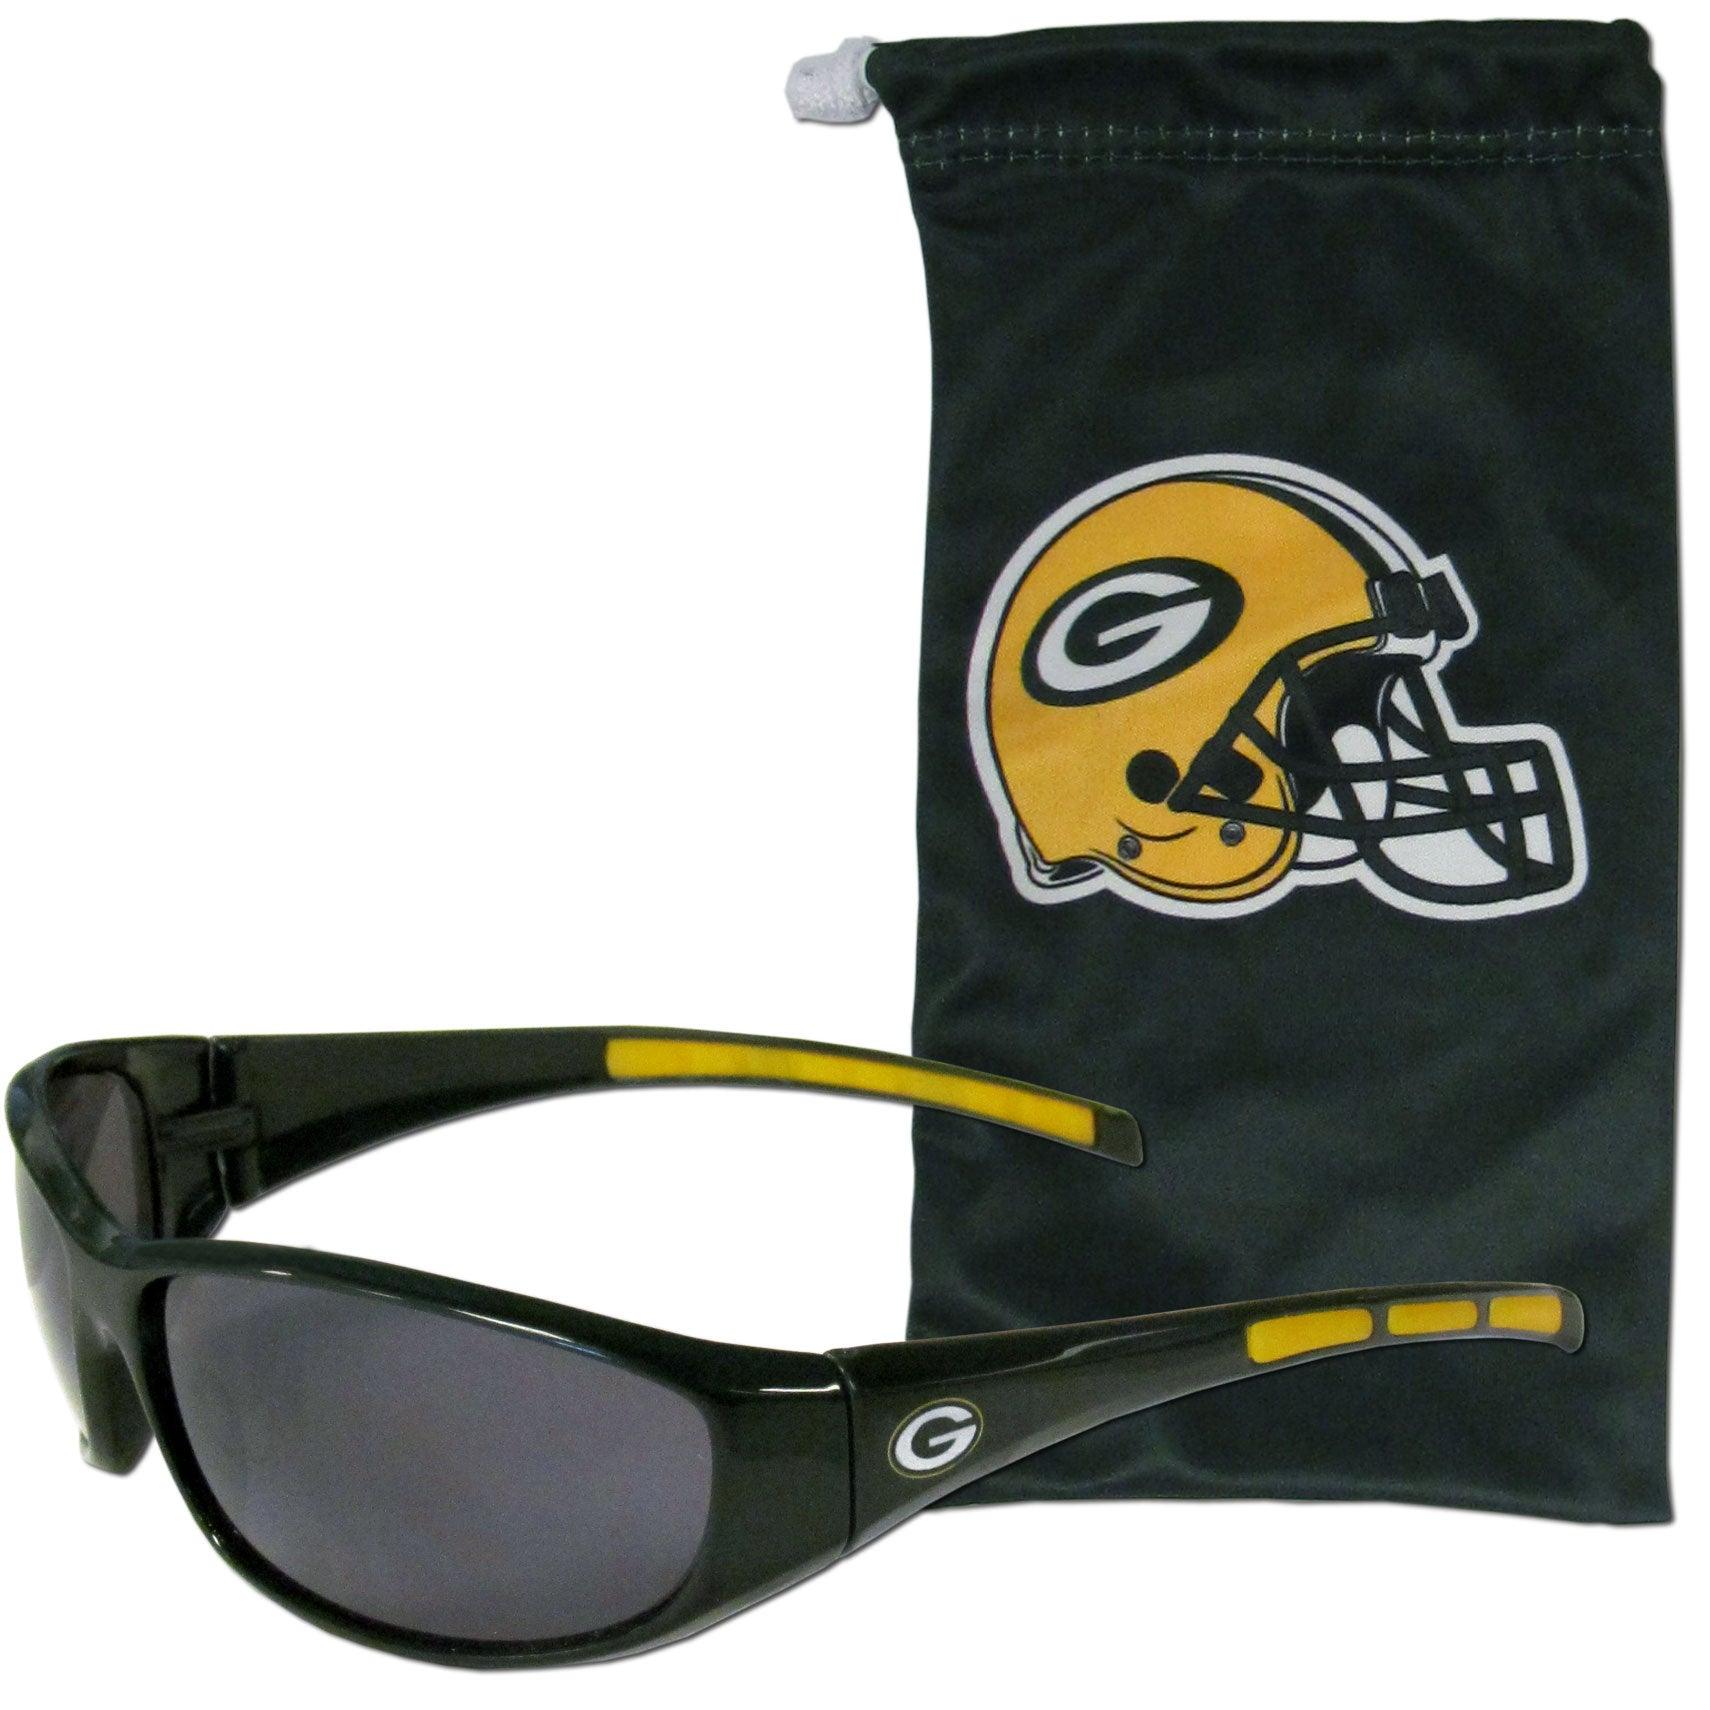 Green Bay Packers Sunglass and Bag Set - Flyclothing LLC